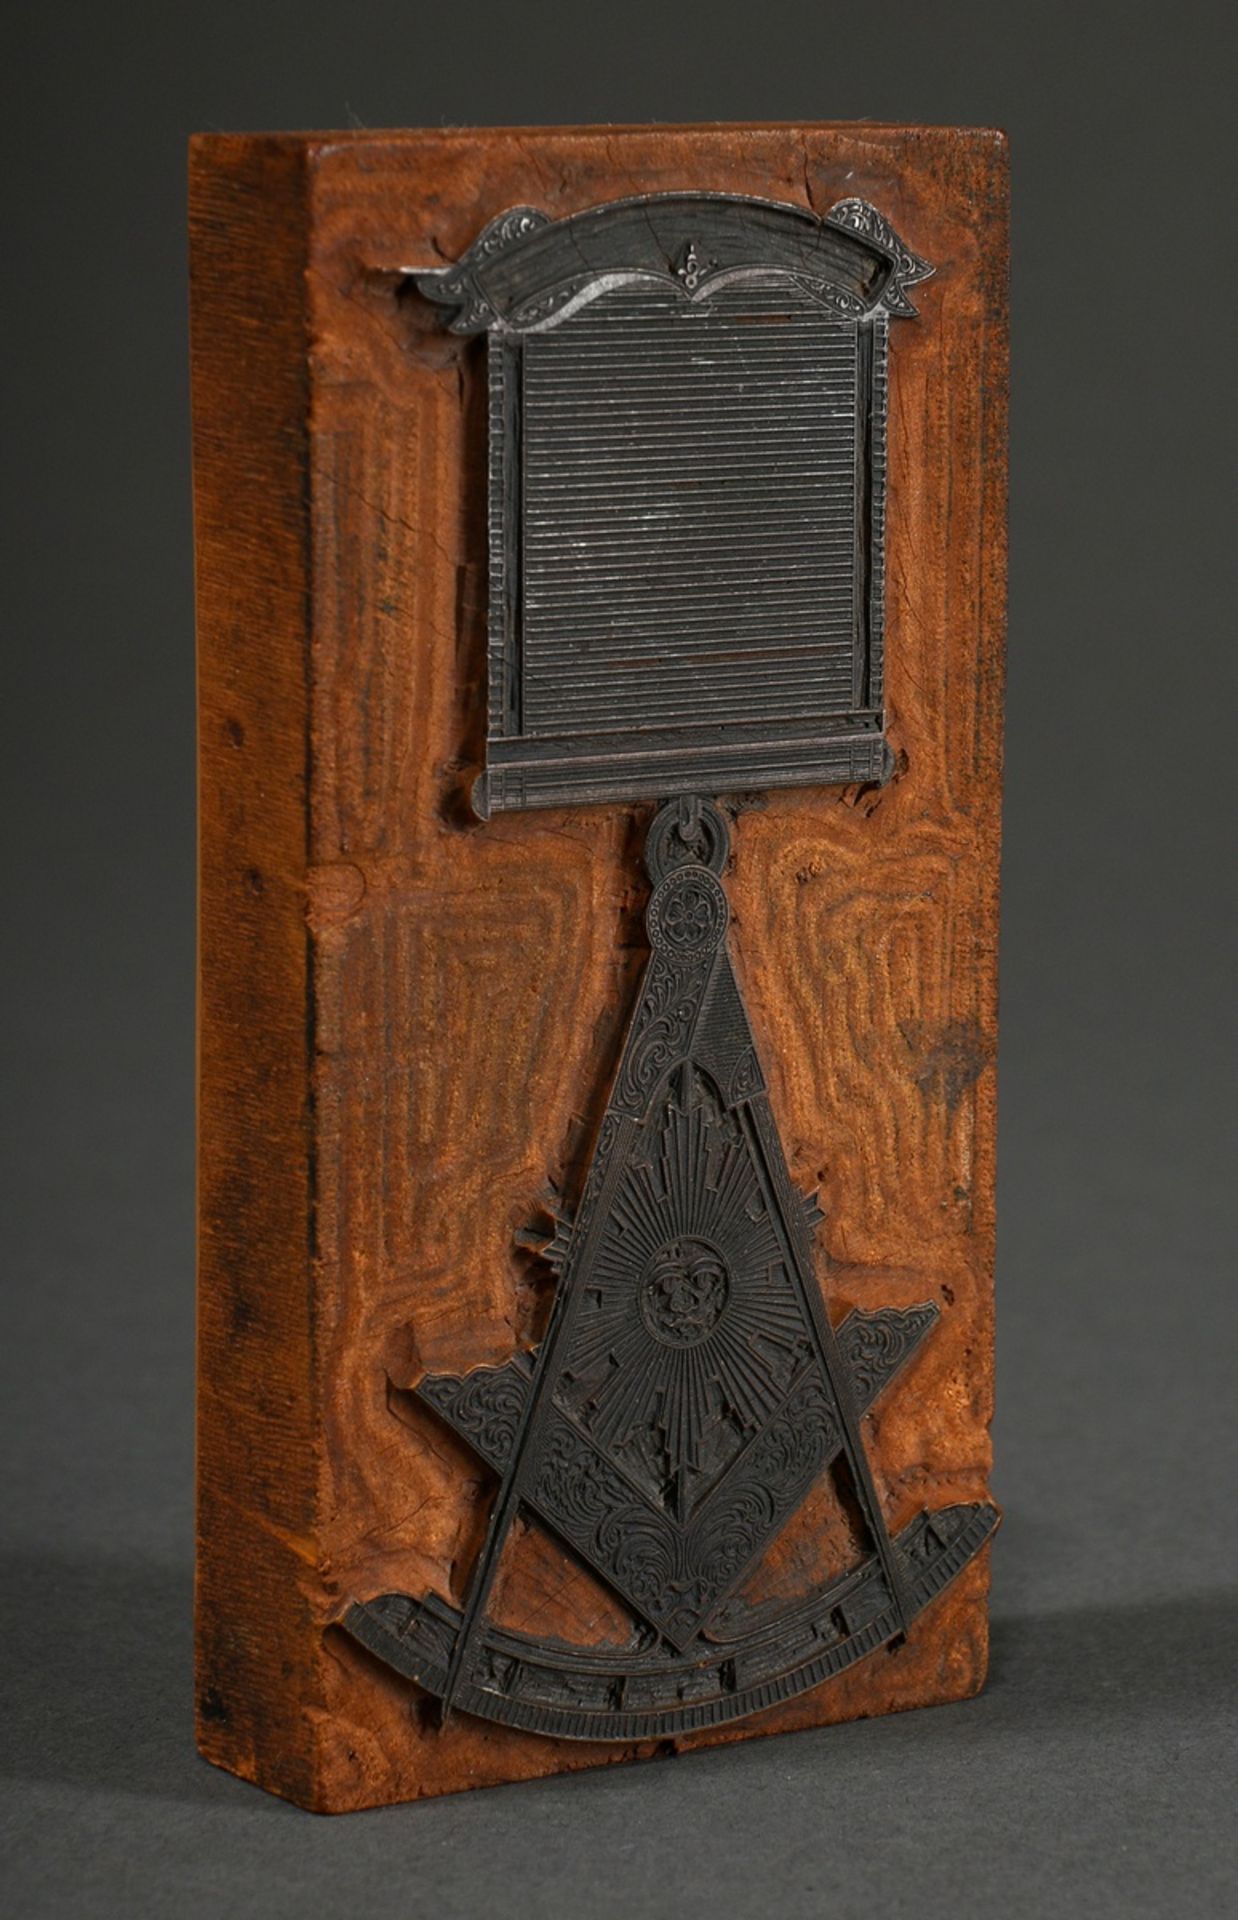 Freemason's stamp with finely deep-engraved metal "compass, angle, sun" on a light wooden corpus, 1